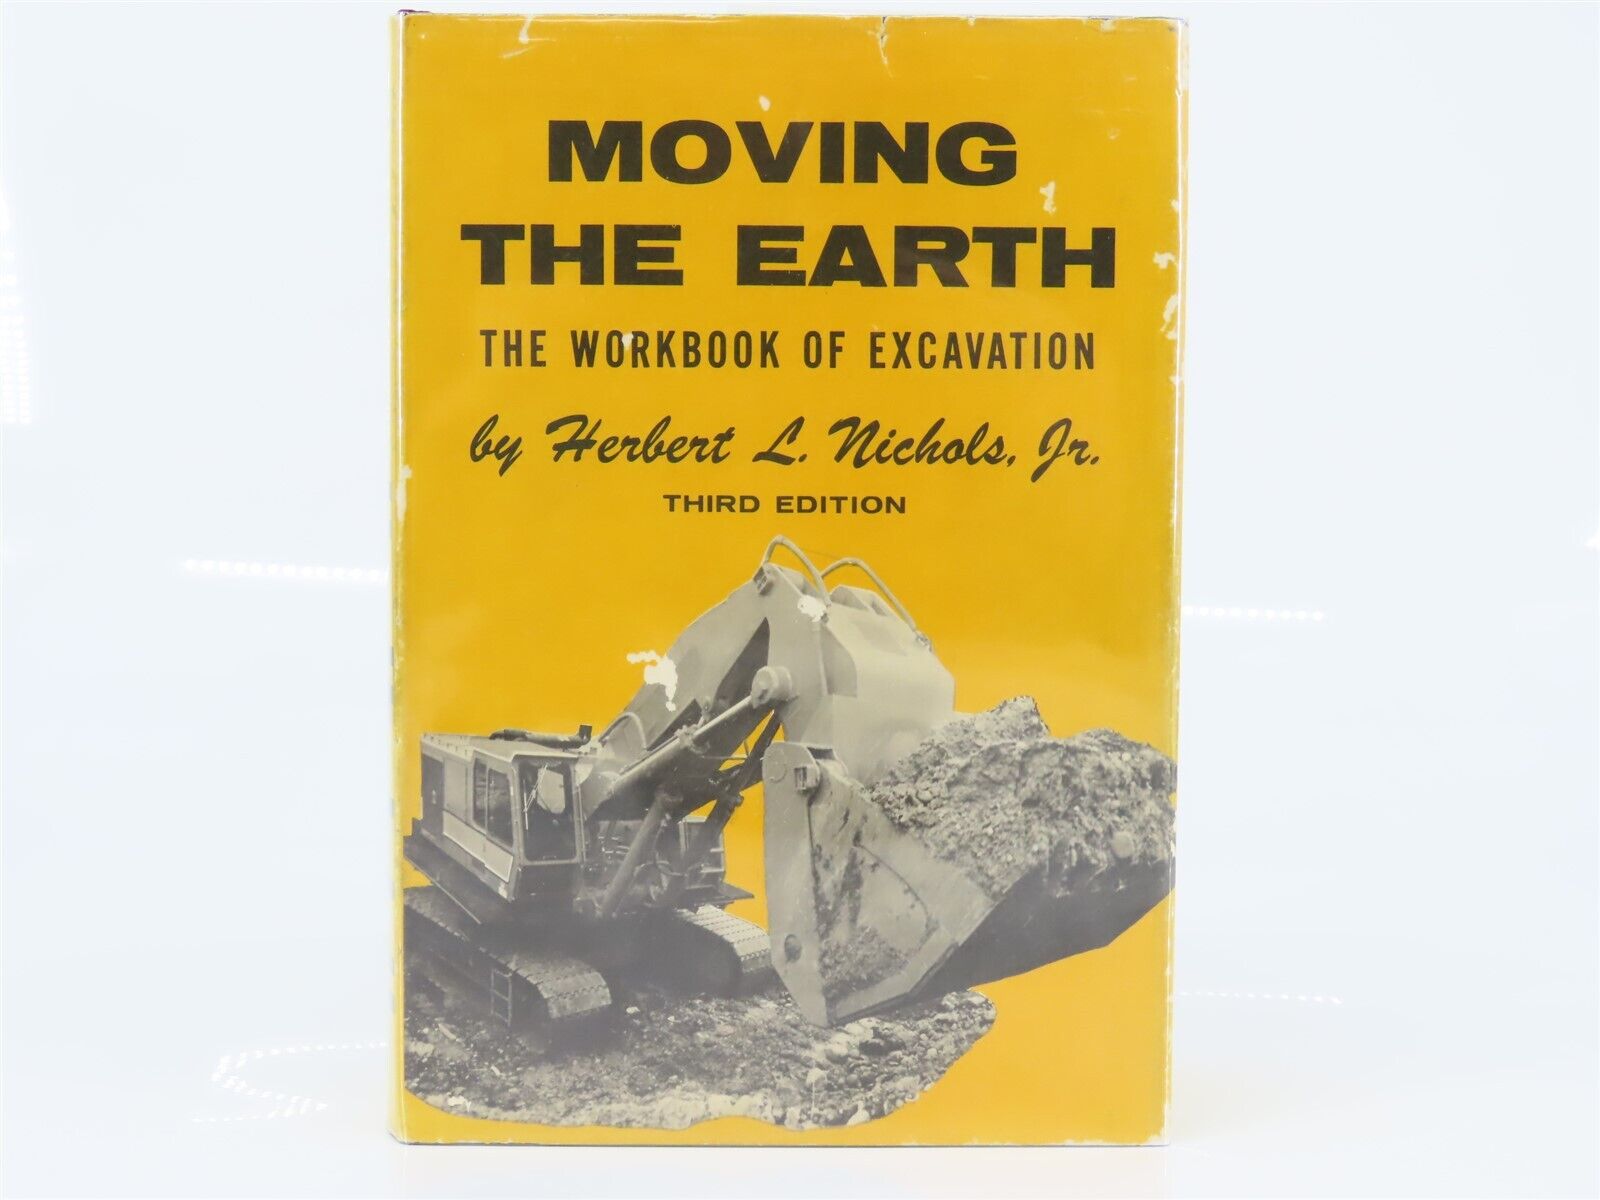 Moving the Earth: The Workbook of Excavation by Herbert L. Nichols, Jr ©1976